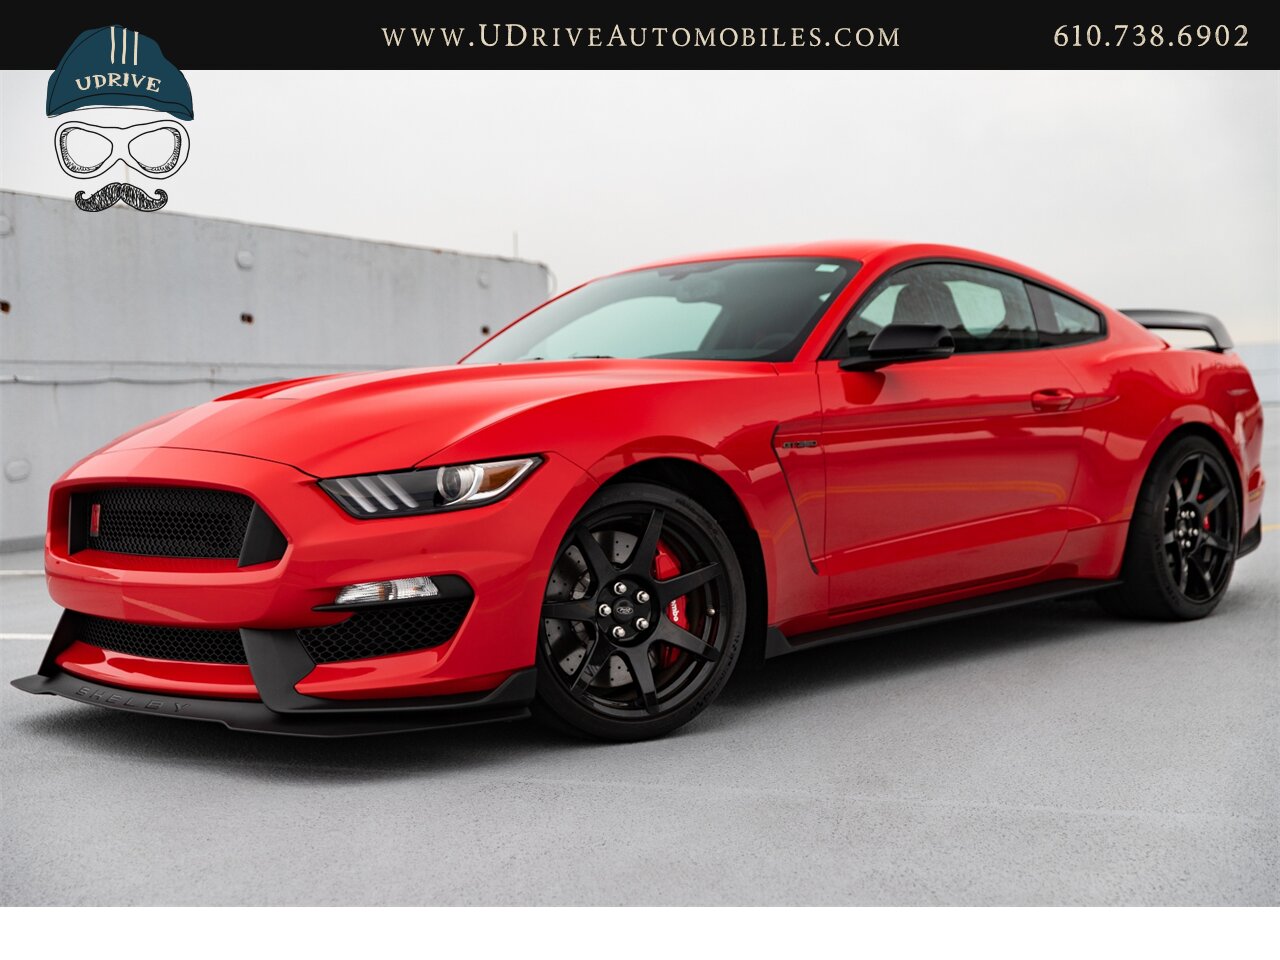 2016 Ford Mustang Shelby GT350R 3k Miles Electronics Pkg  1 of 32 Race Red Produced for USA As New - Photo 1 - West Chester, PA 19382